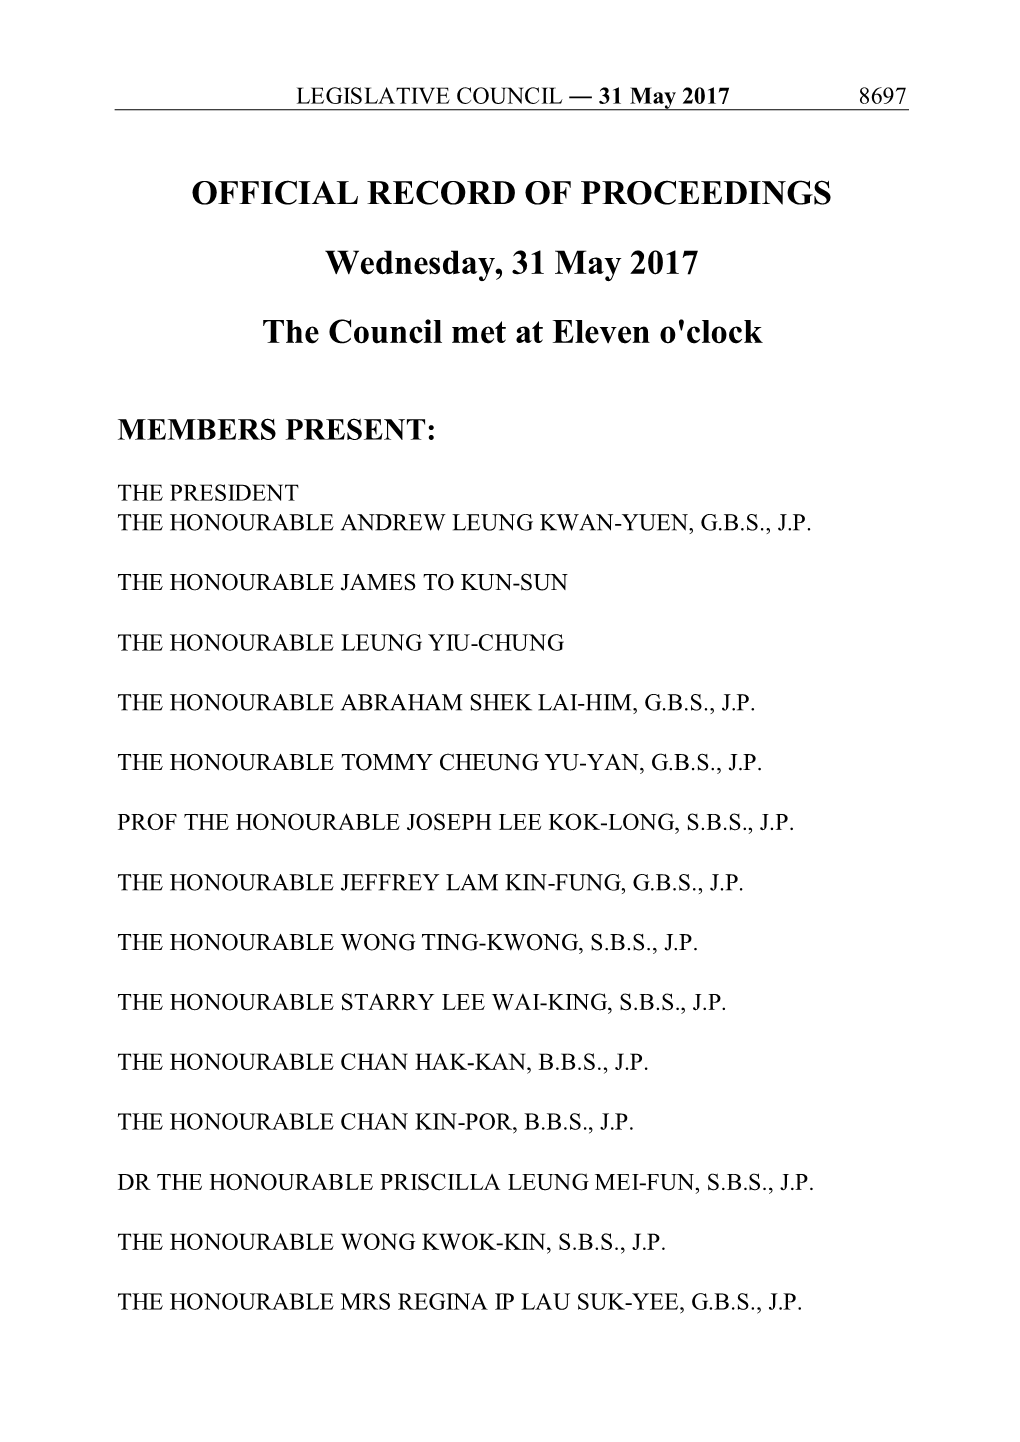 OFFICIAL RECORD of PROCEEDINGS Wednesday, 31